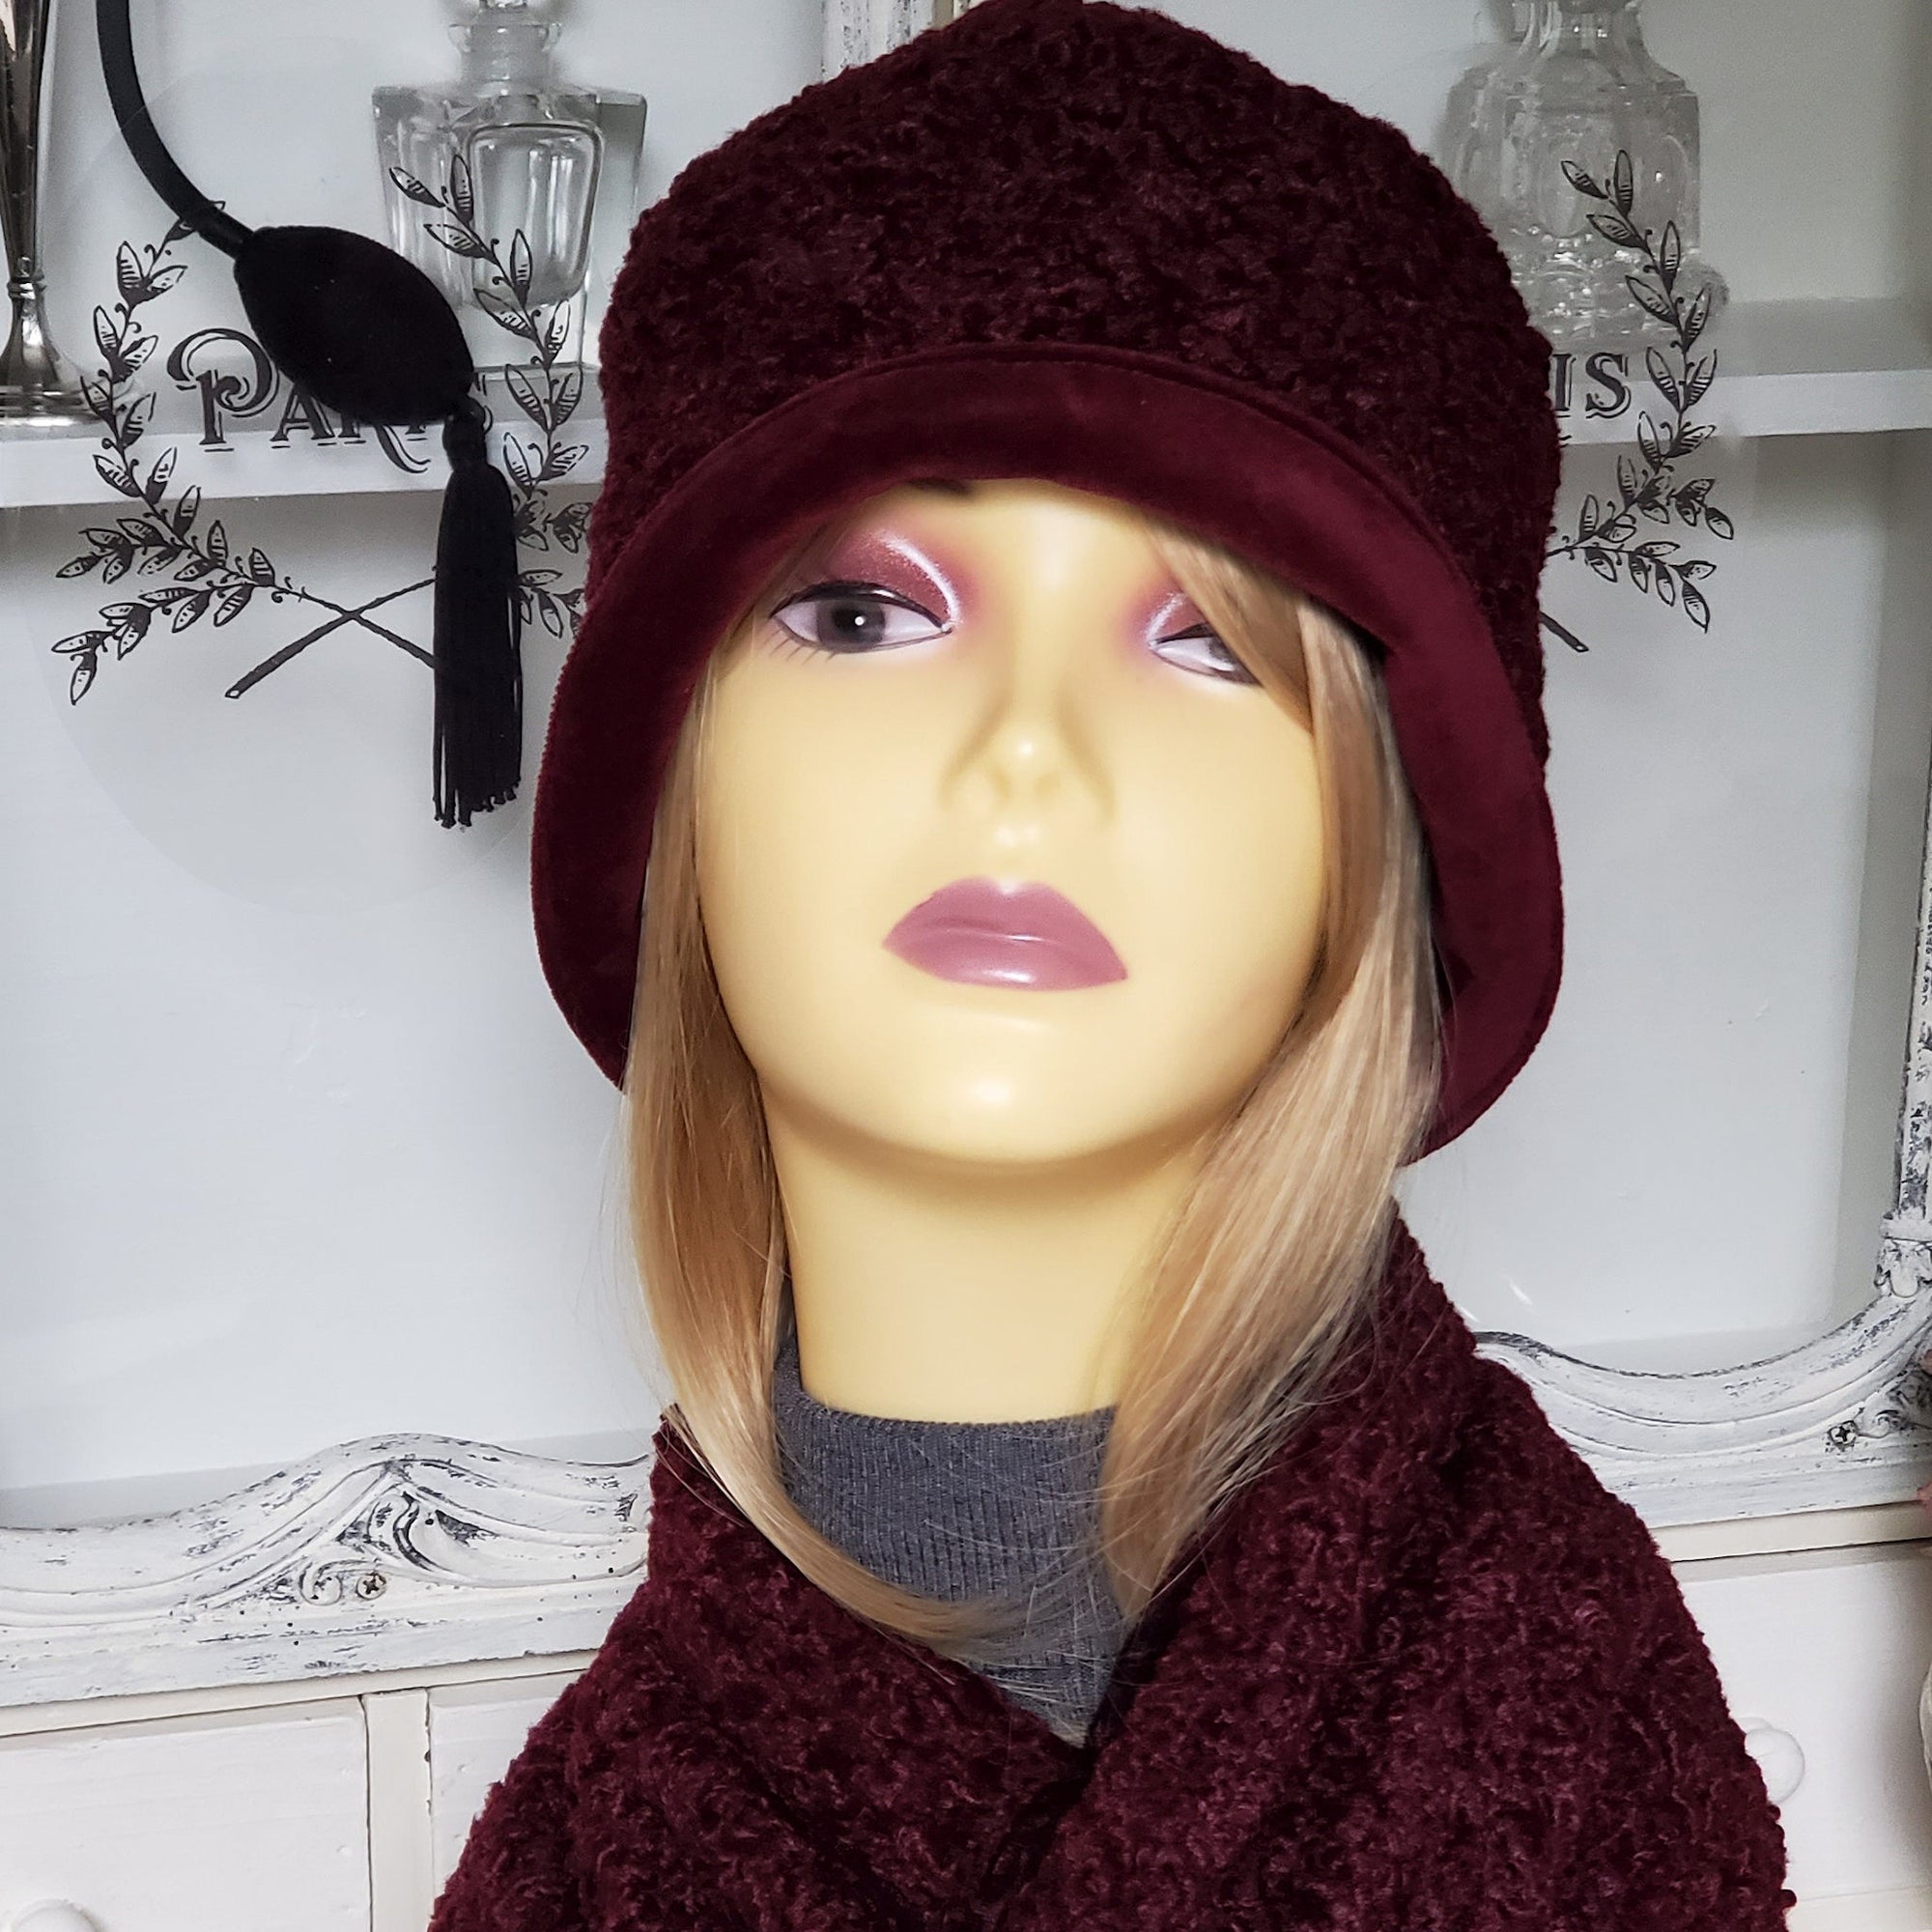 Women's Winter Hat and Scarf Set in Burgundy